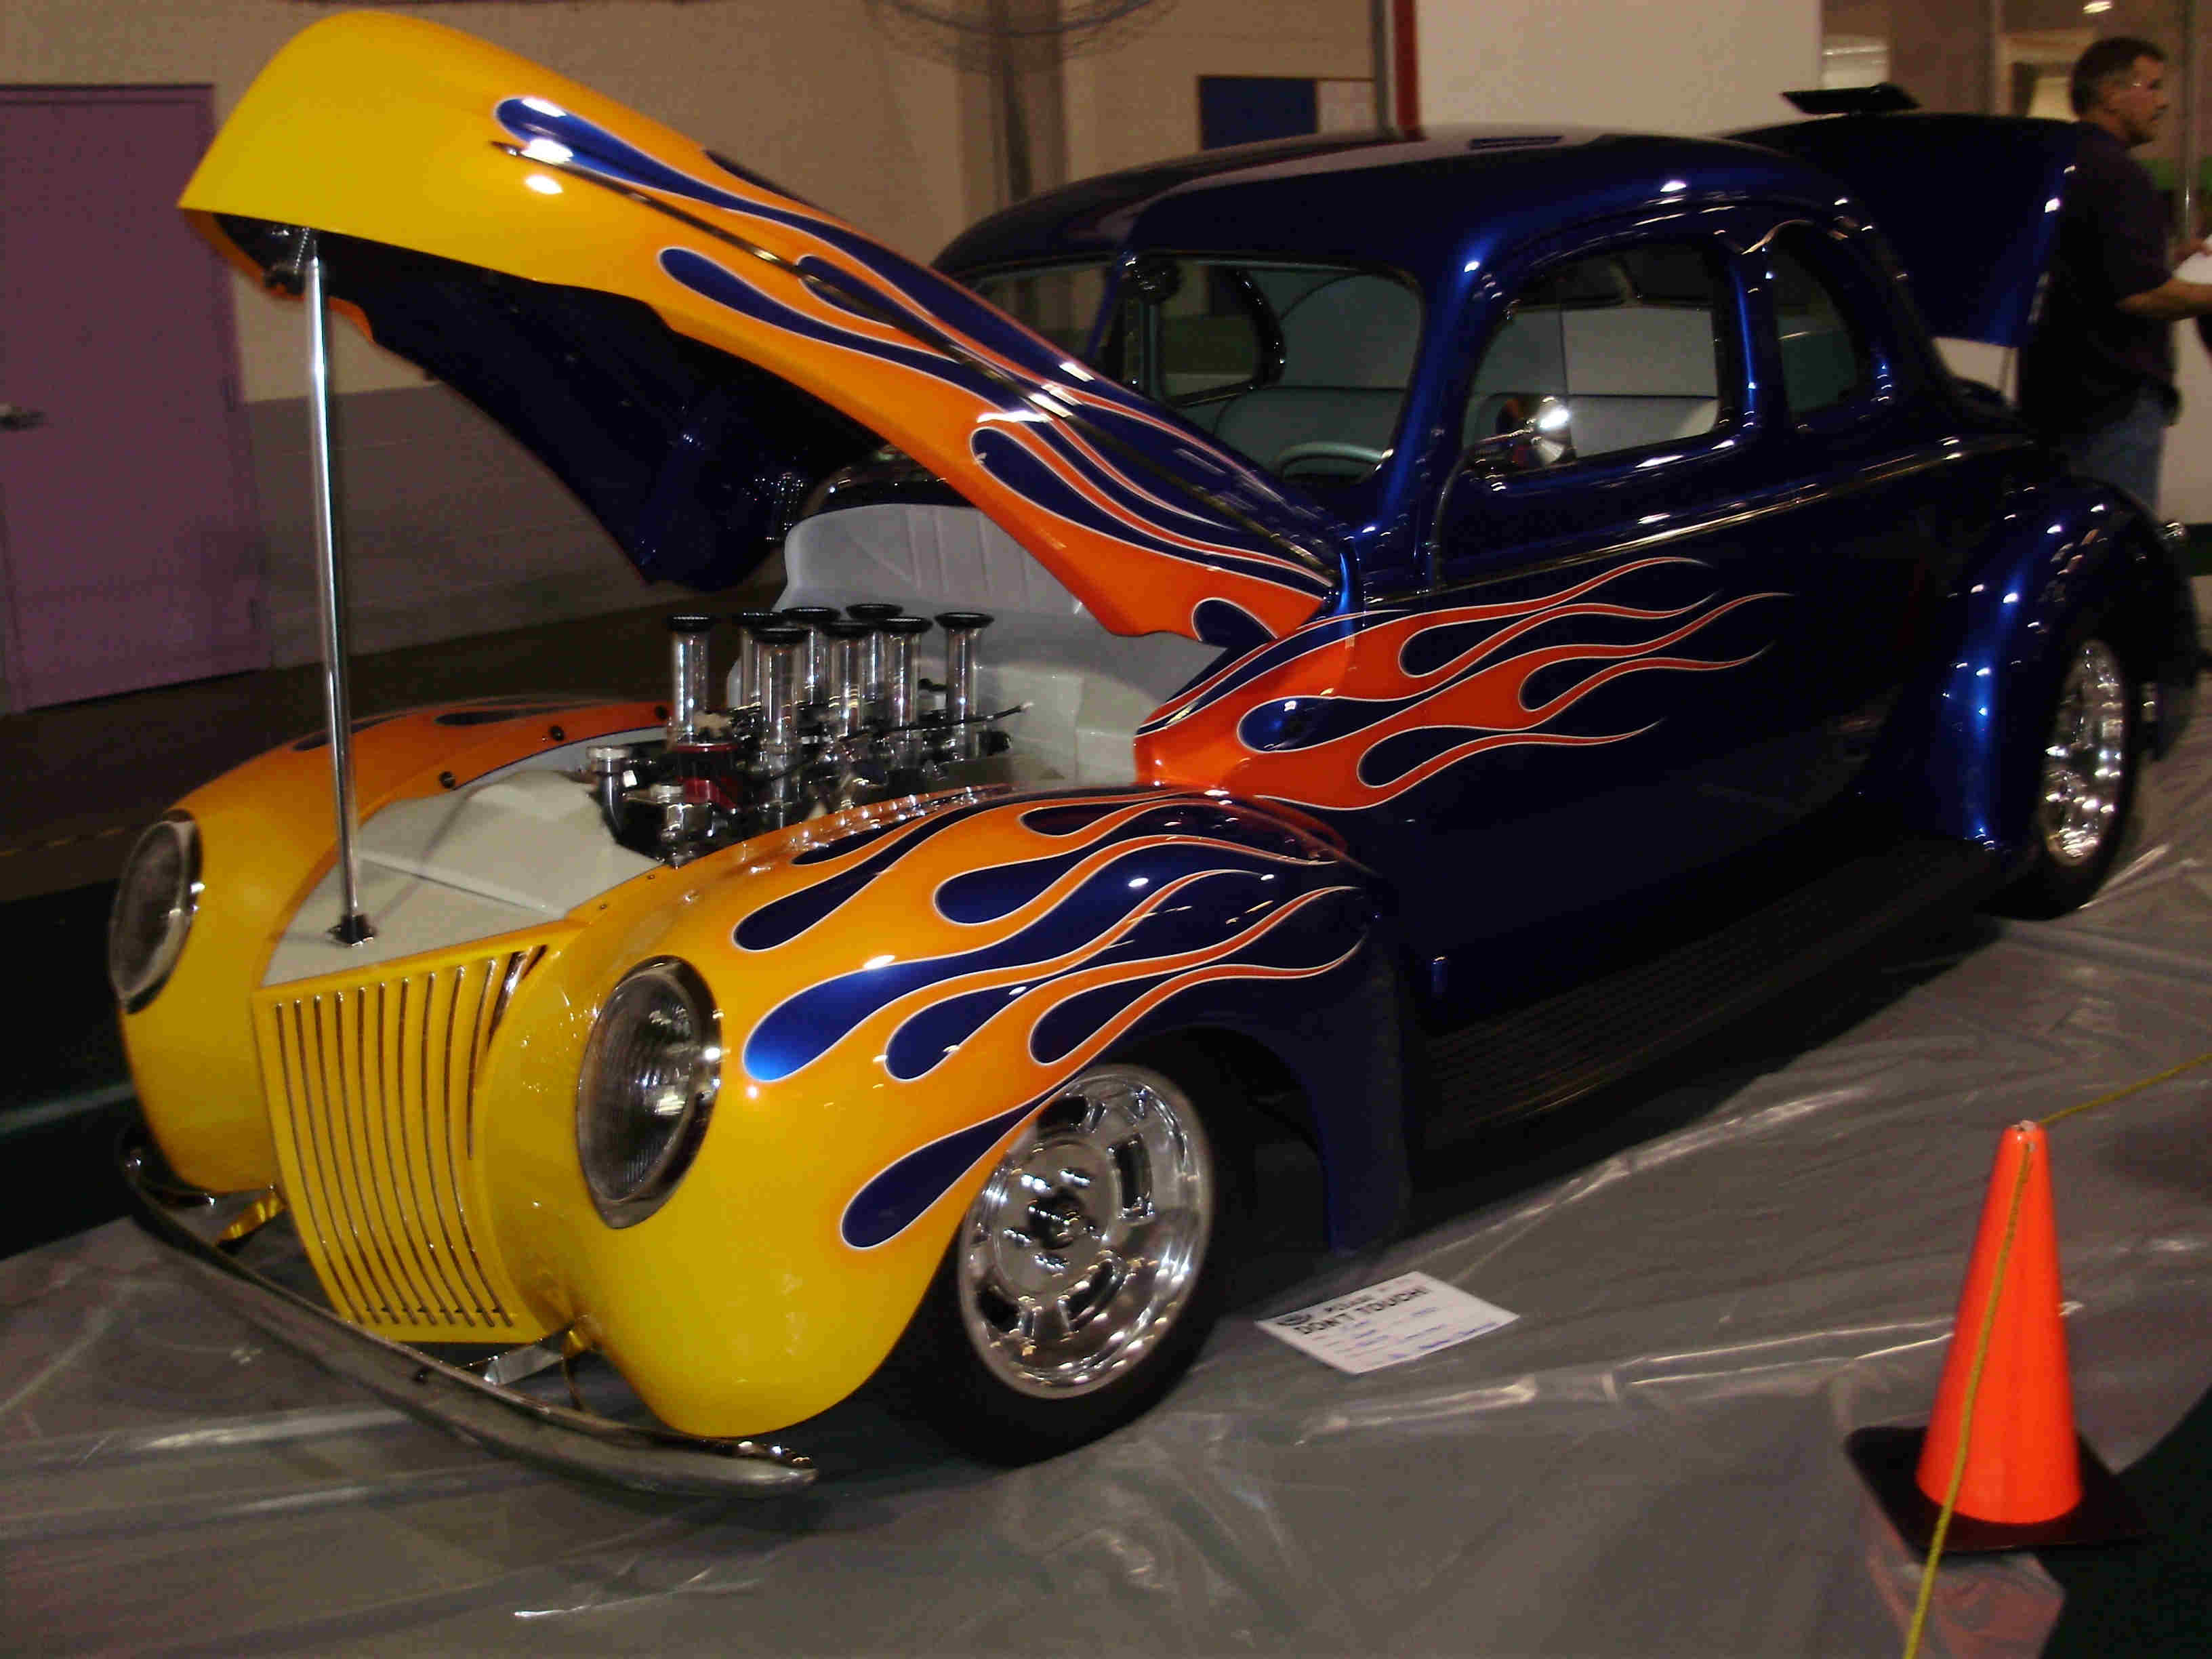 Bill Cromling's 1940 Ford Coupe